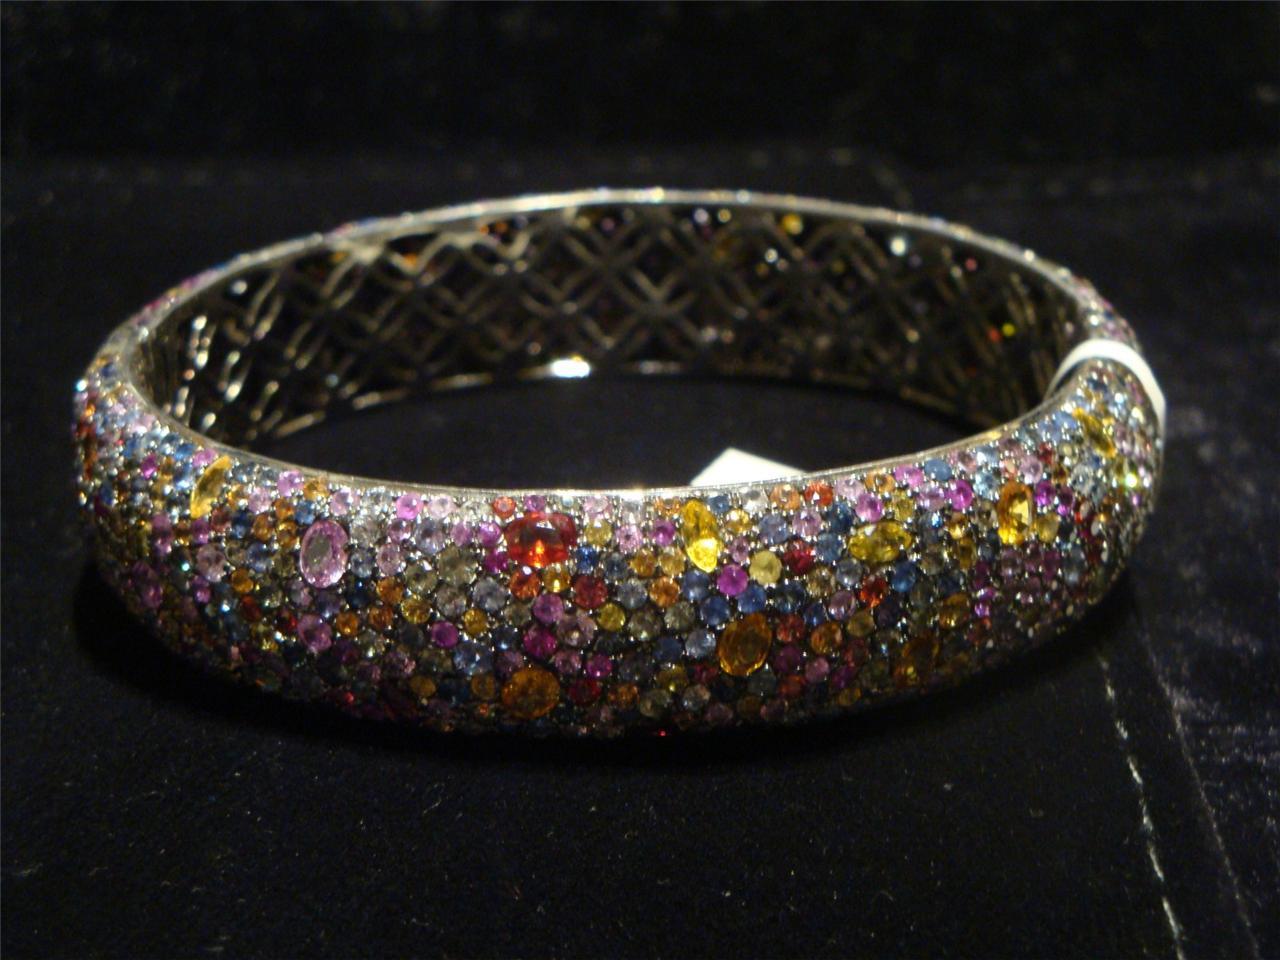 The Following Item we are offering is this Rare Magnificent FANCY COLORFUL RAINBOW SAPPHIRE STERLING SILVER CUFF BANGLE BRACELET. T.C.W. APPROX 30CTS!!! This Magnificent Bangle is a Rare Sample Piece that were sold in select Five Star Hotels and